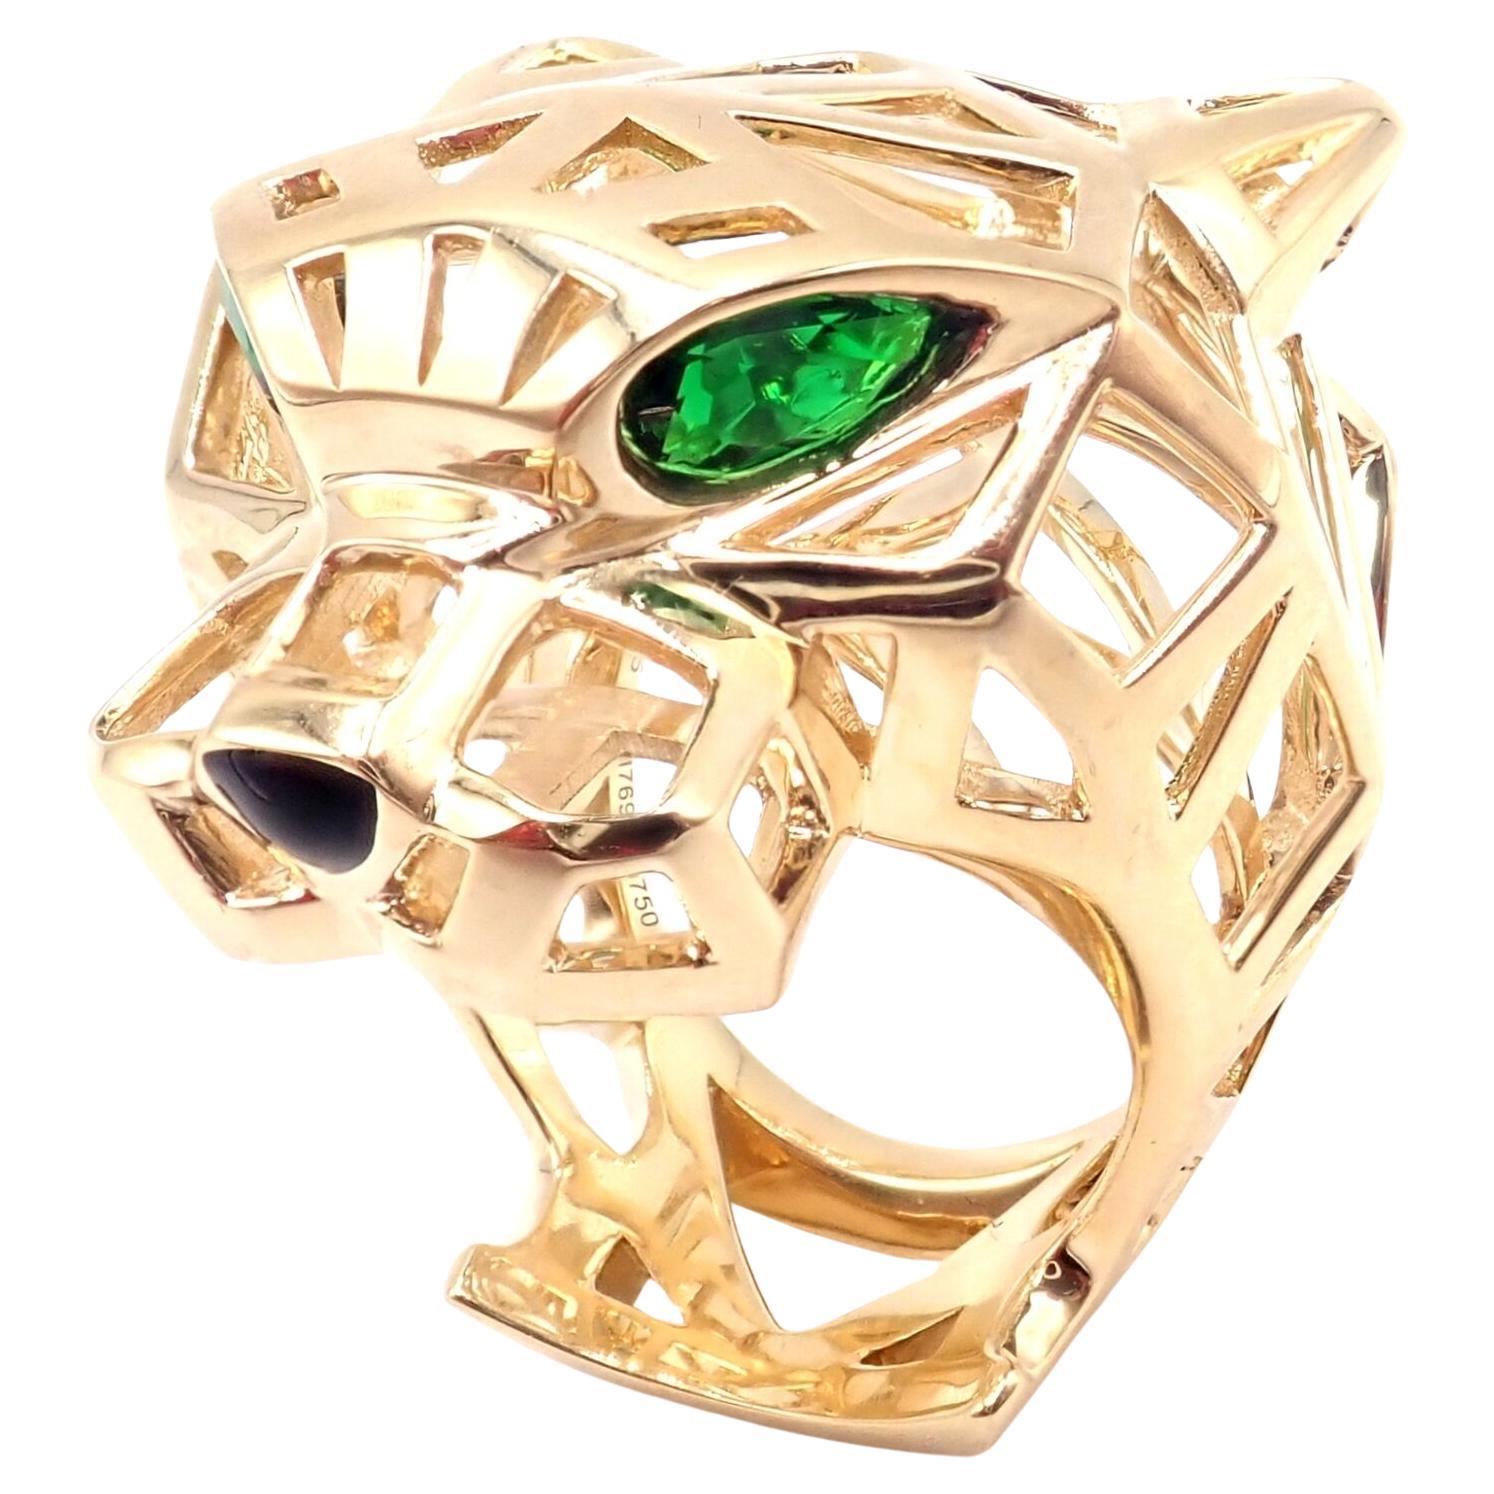 Cartier Großer Ring, Panther Panthere Tsavorit Onyx Gelbgold